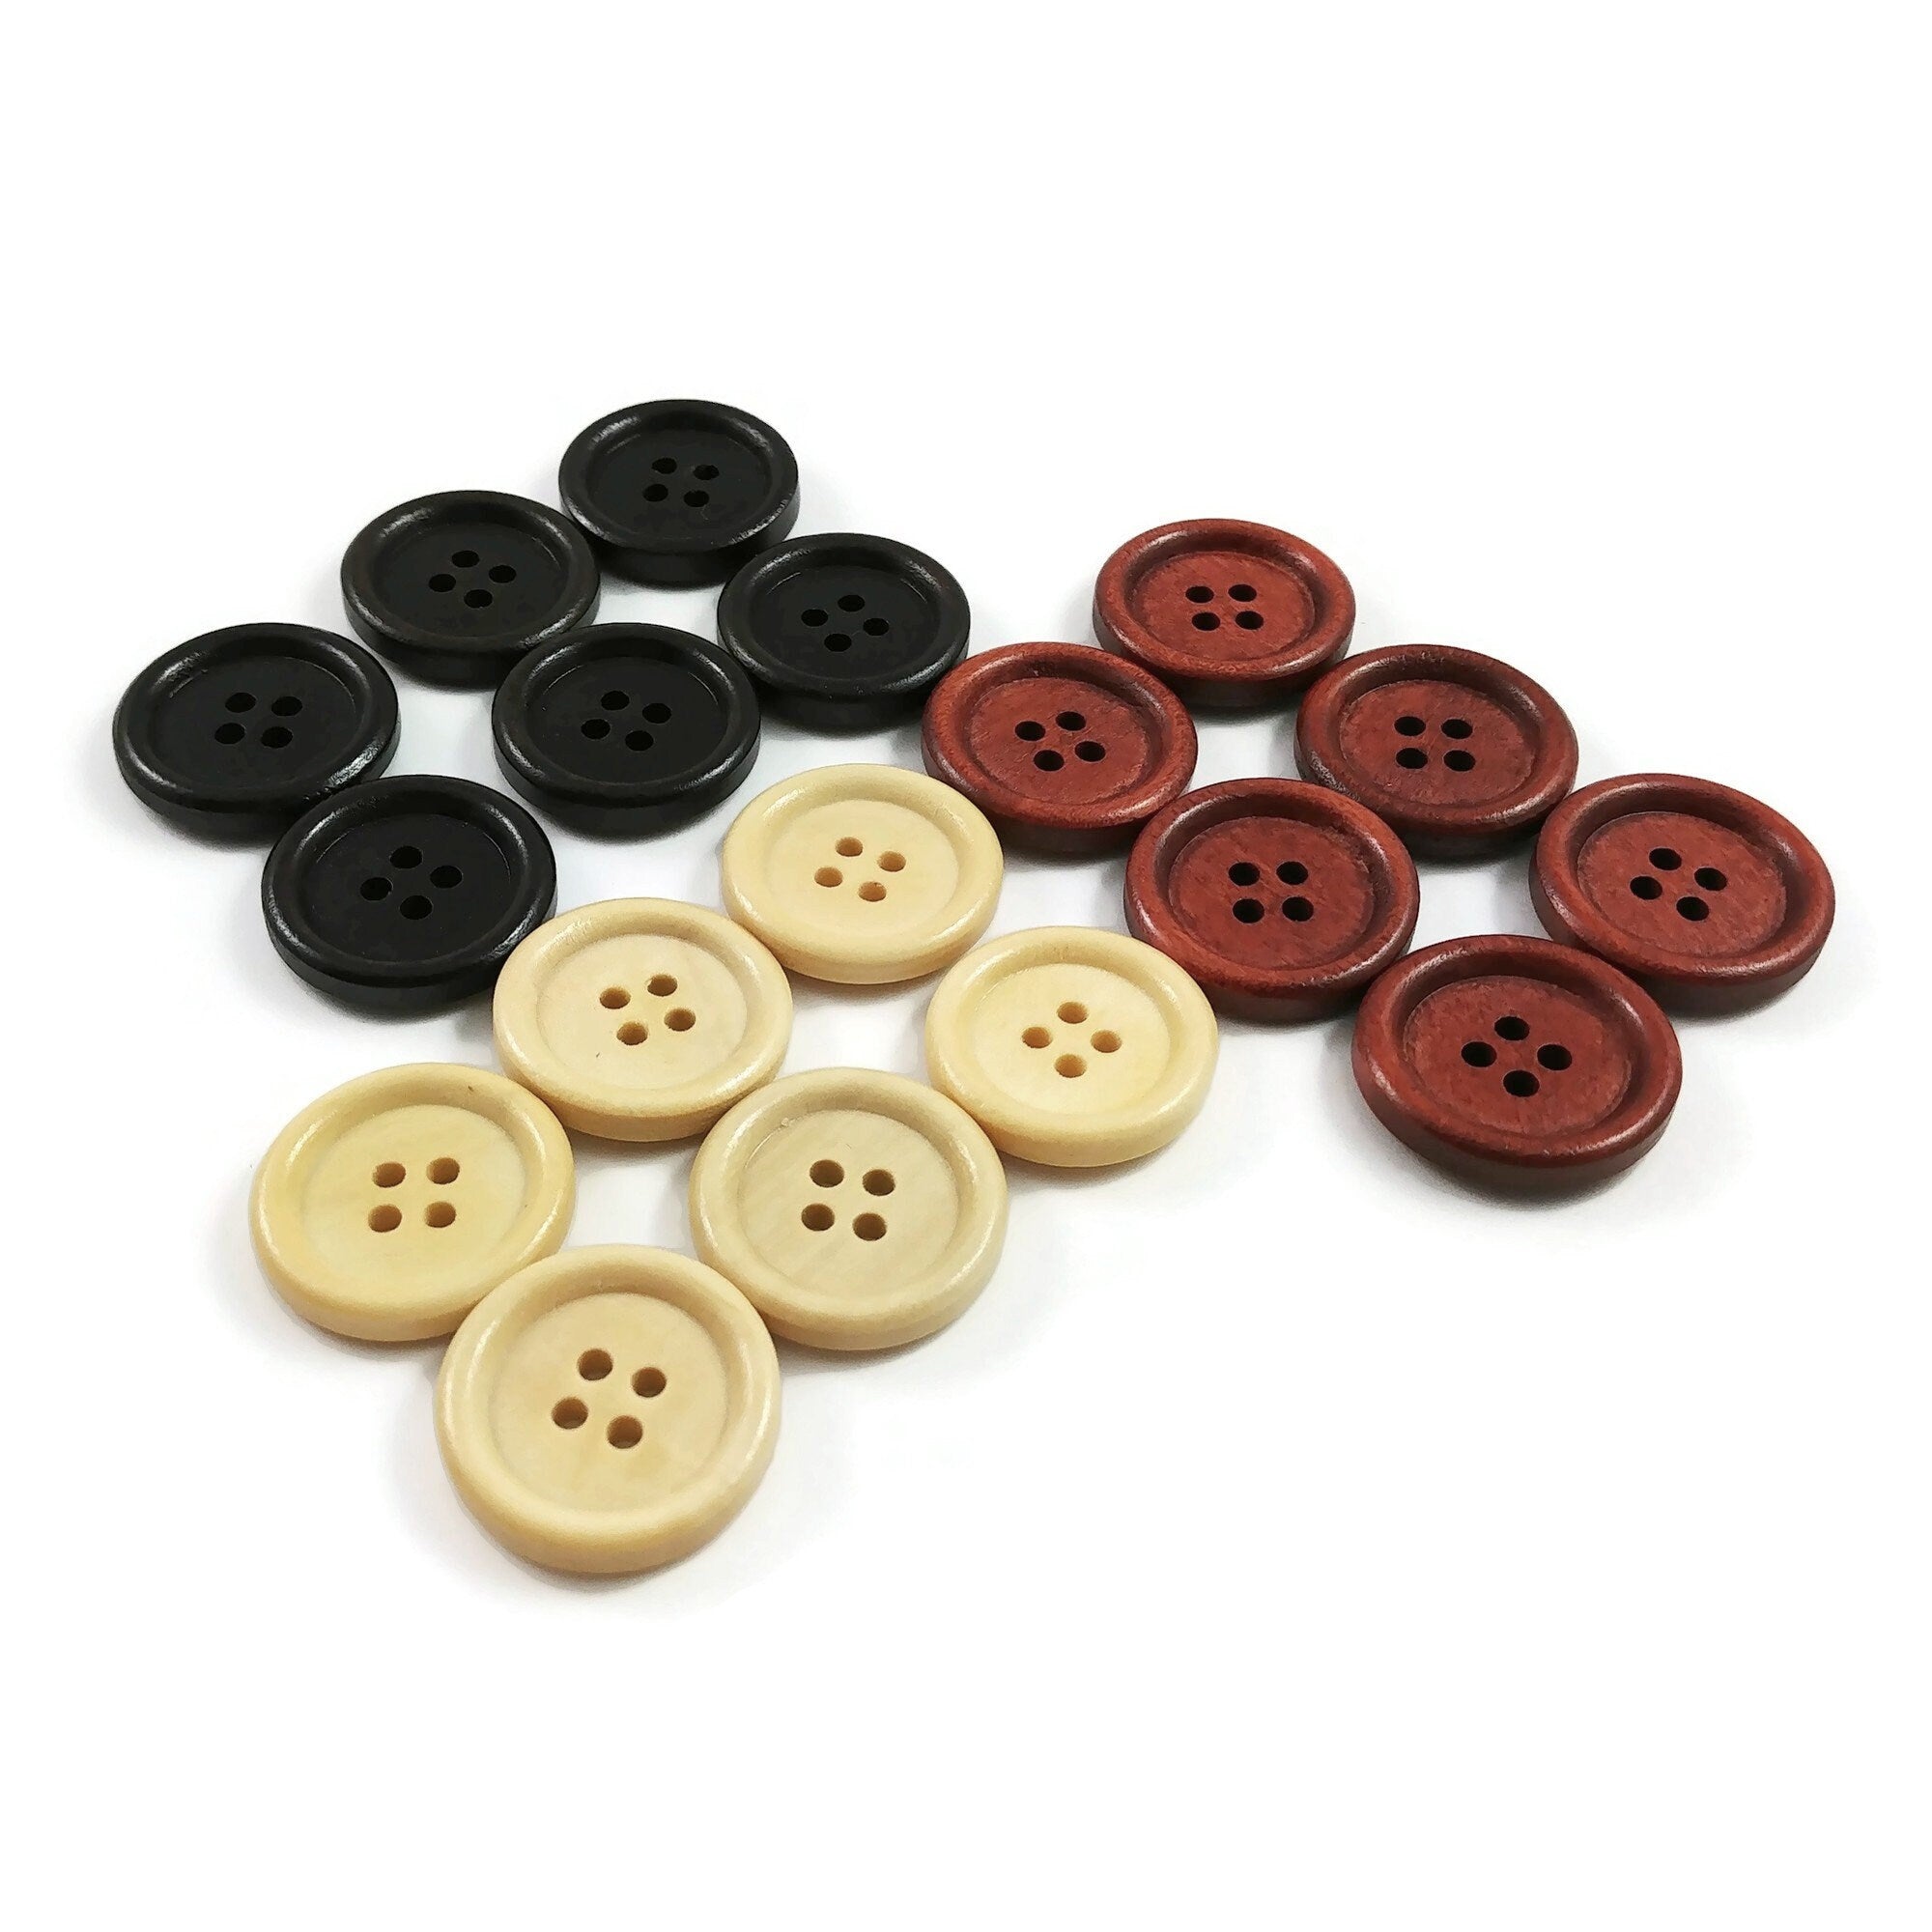 60pcs Wooden Toggle Buttons Brownl Wooden Button in Sewing for